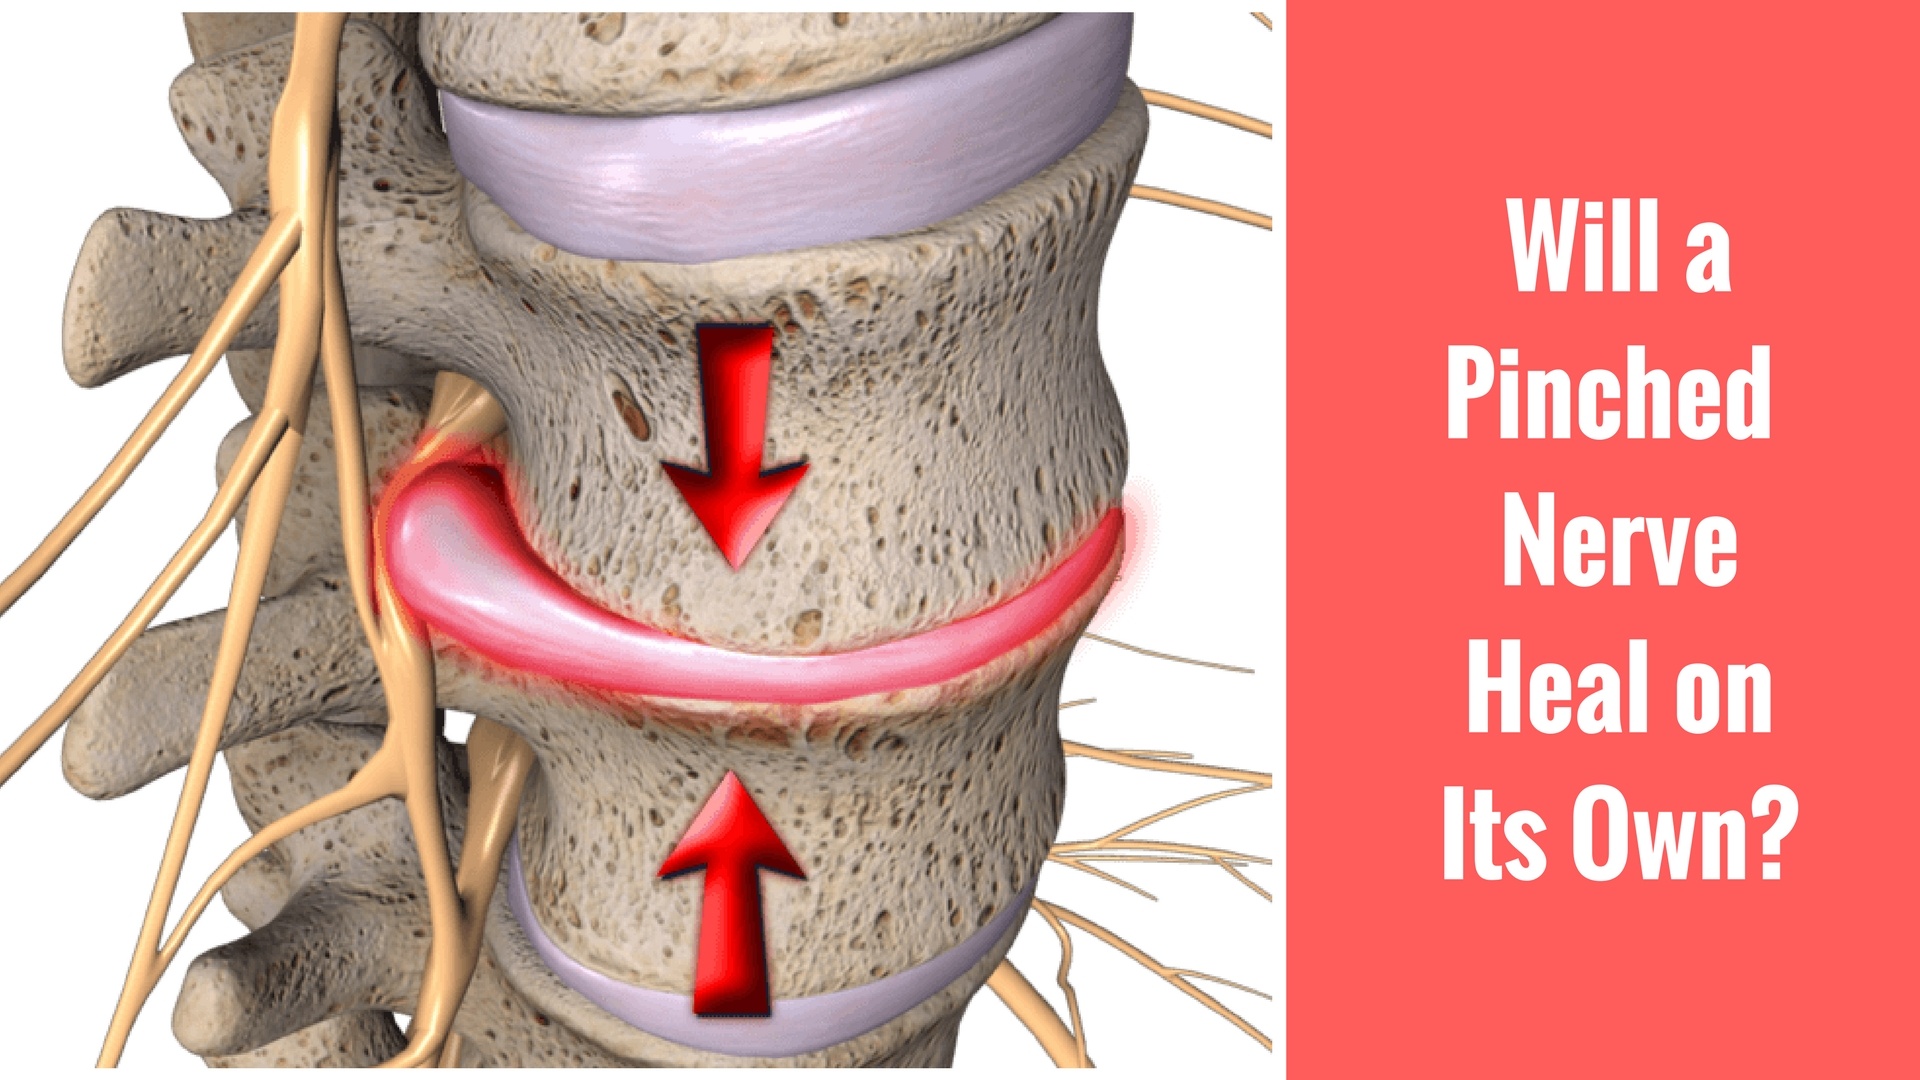 Will a Pinched Nerve Heal on Its Own? SpineCare - St. Joseph, MI  Chiropractor